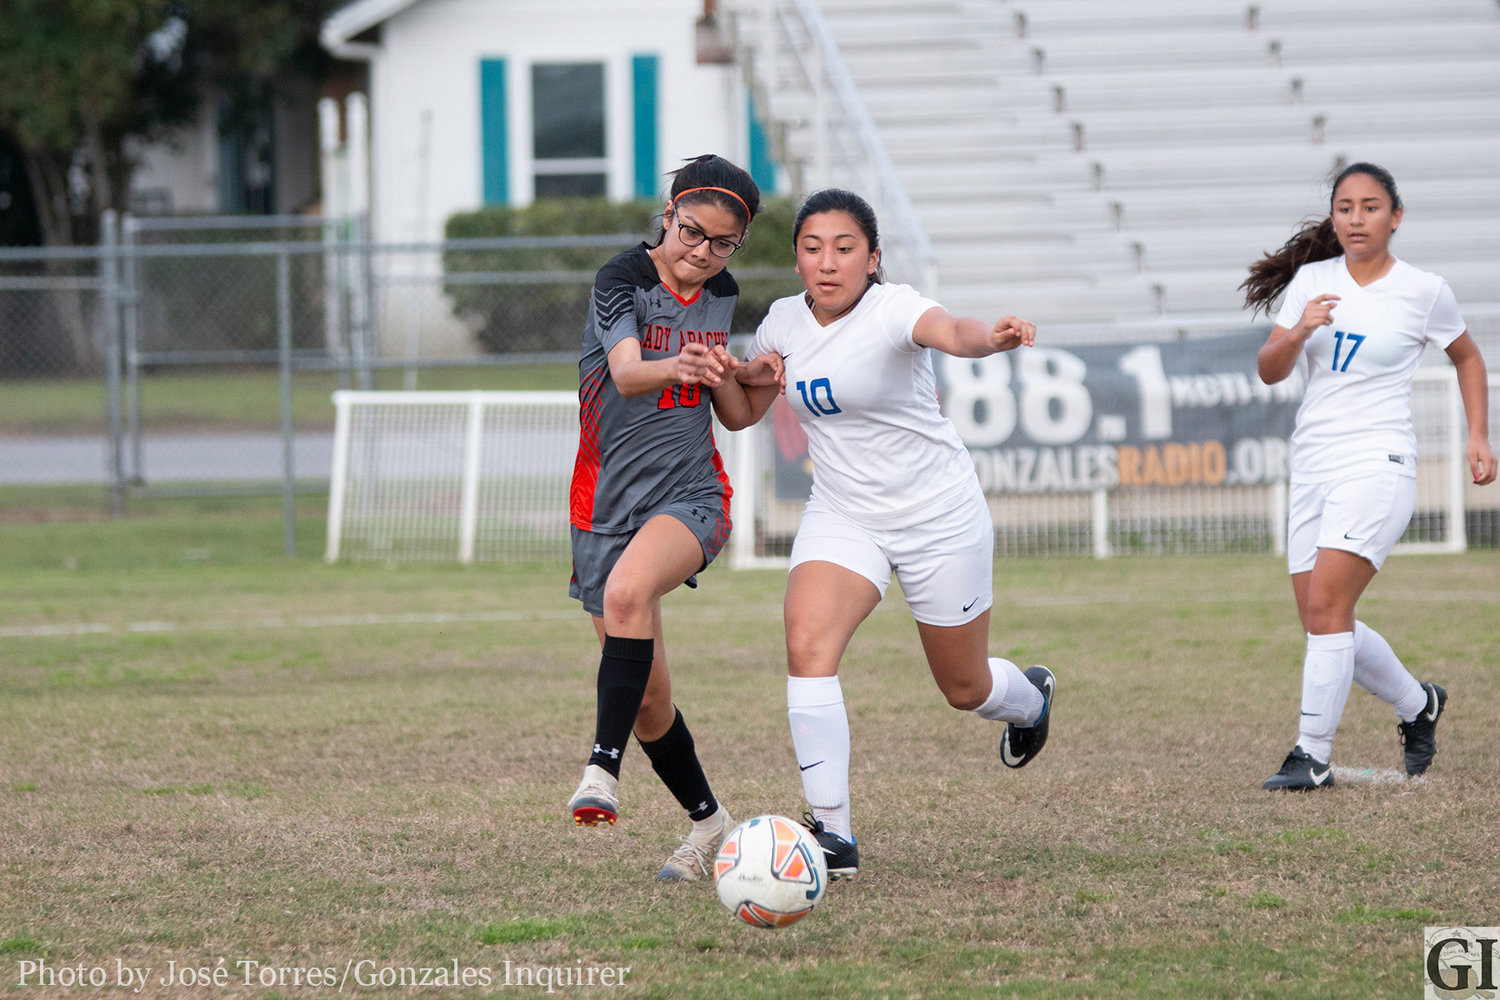 Natalya Cruz (10, left) fights through a defender for possession in Gonzales’ 2-0 victory last Friday. The Lady Apaches moved to third place after their Senior Night win.